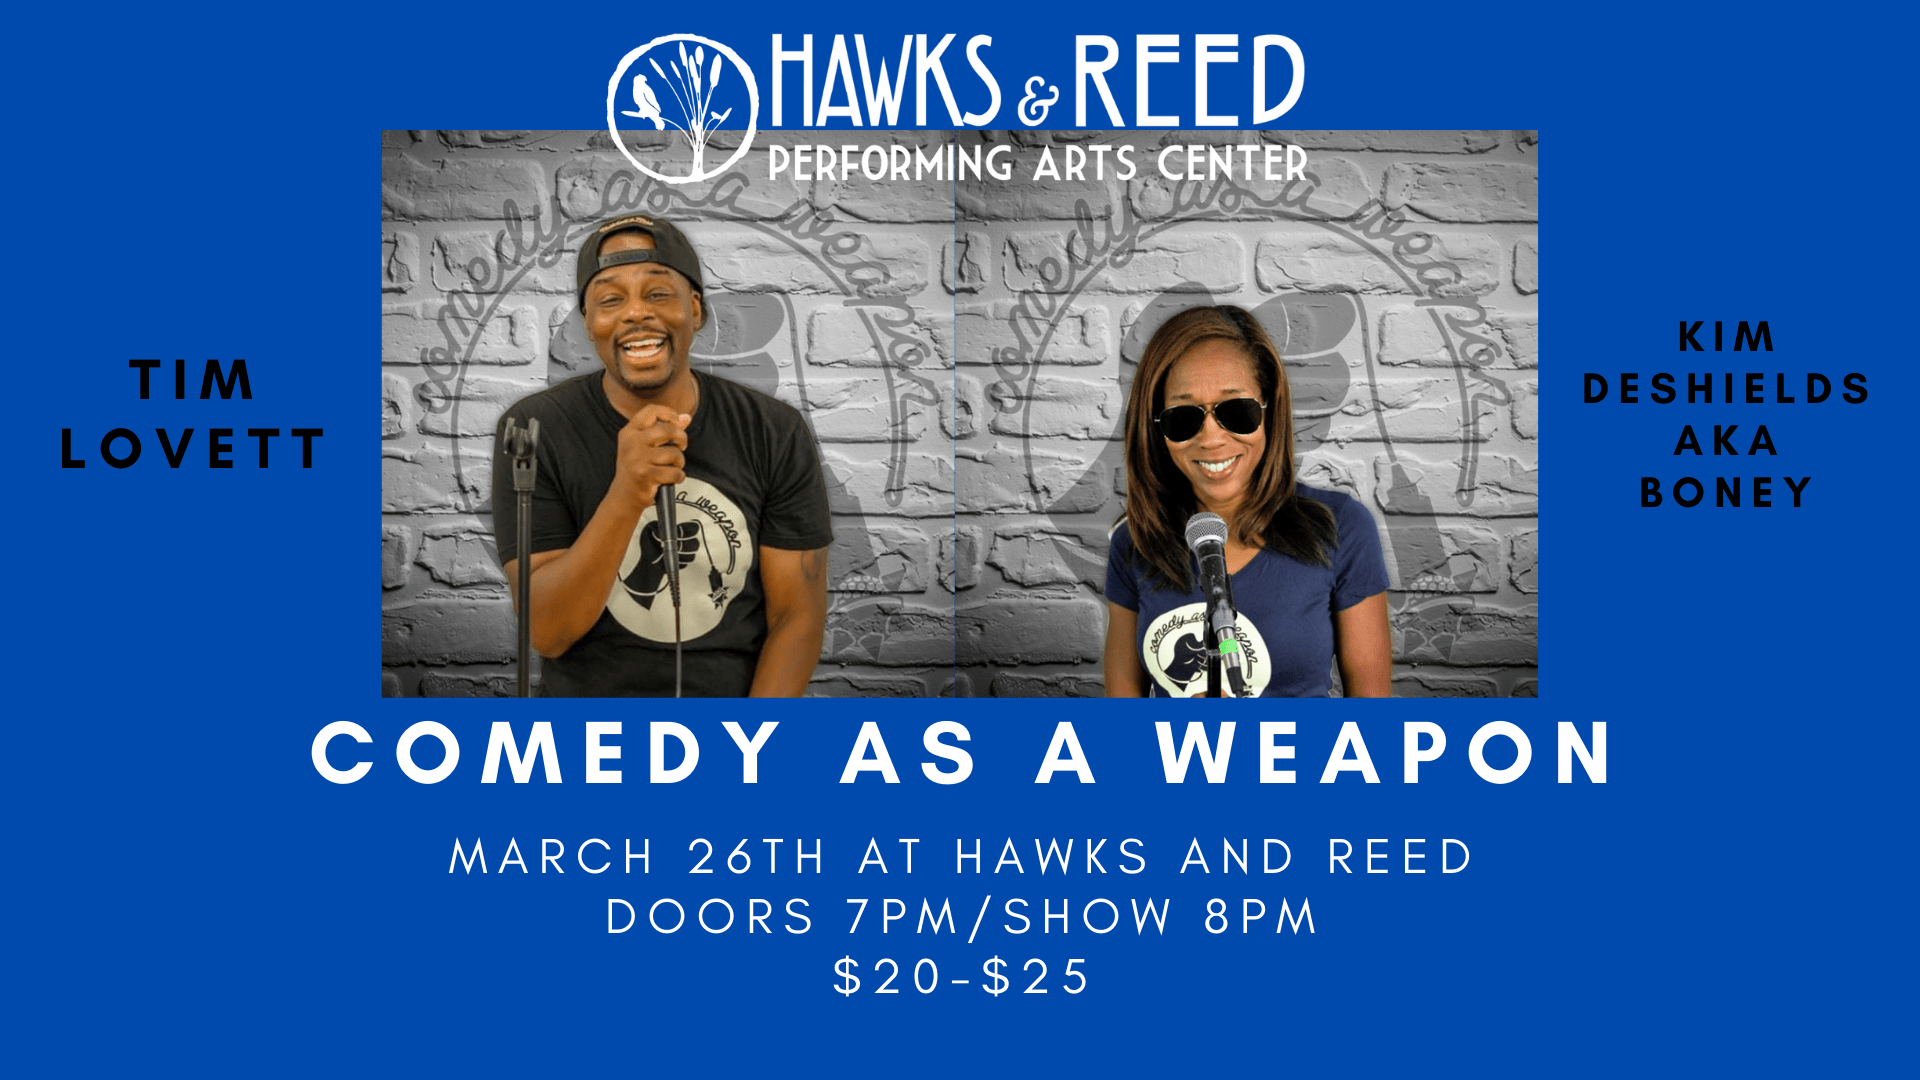 Comedy as a Weapon with Kim DeShields and Tim Lovett at Hawks and Reed